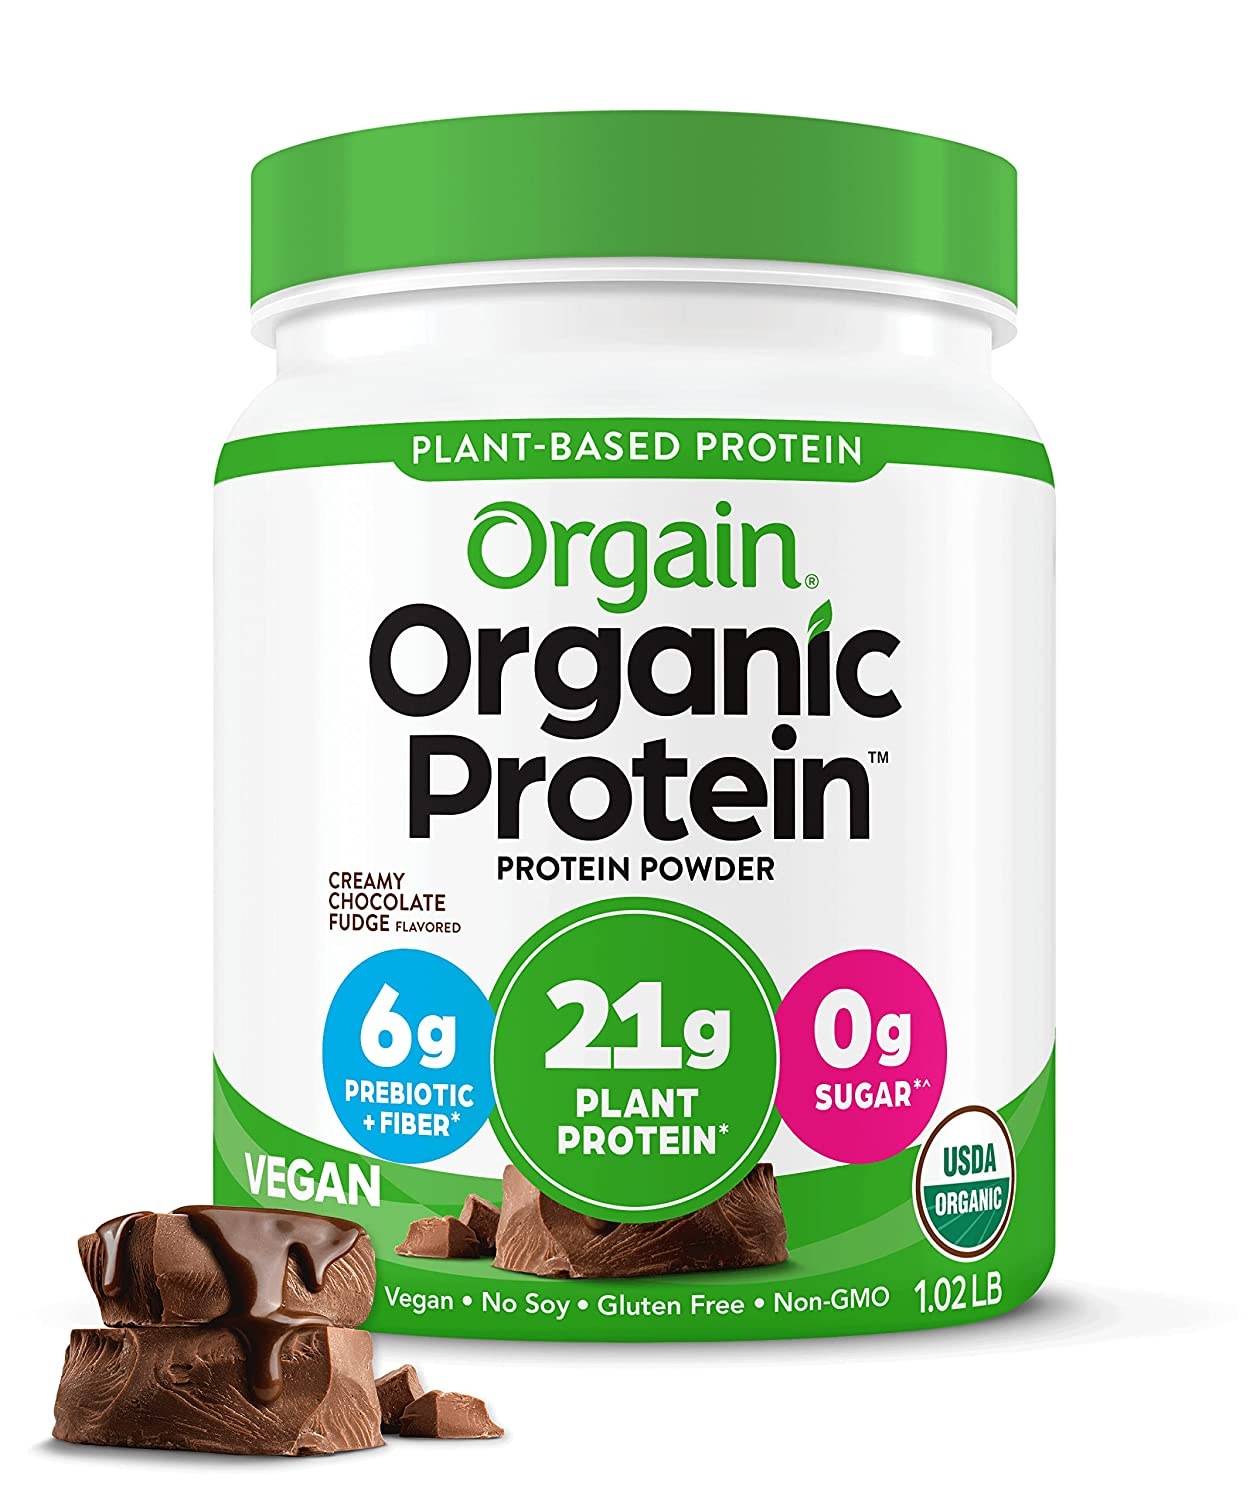 Orgain Organic Plant Based Protein Powder, Vanilla Bean - 21G of Protein, Vegan, Low Net Carbs, Non Dairy, Gluten Free, Lactose Free, No Sugar Added, Soy Free, Kosher, 1.02 Pound (Packaging May Vary)